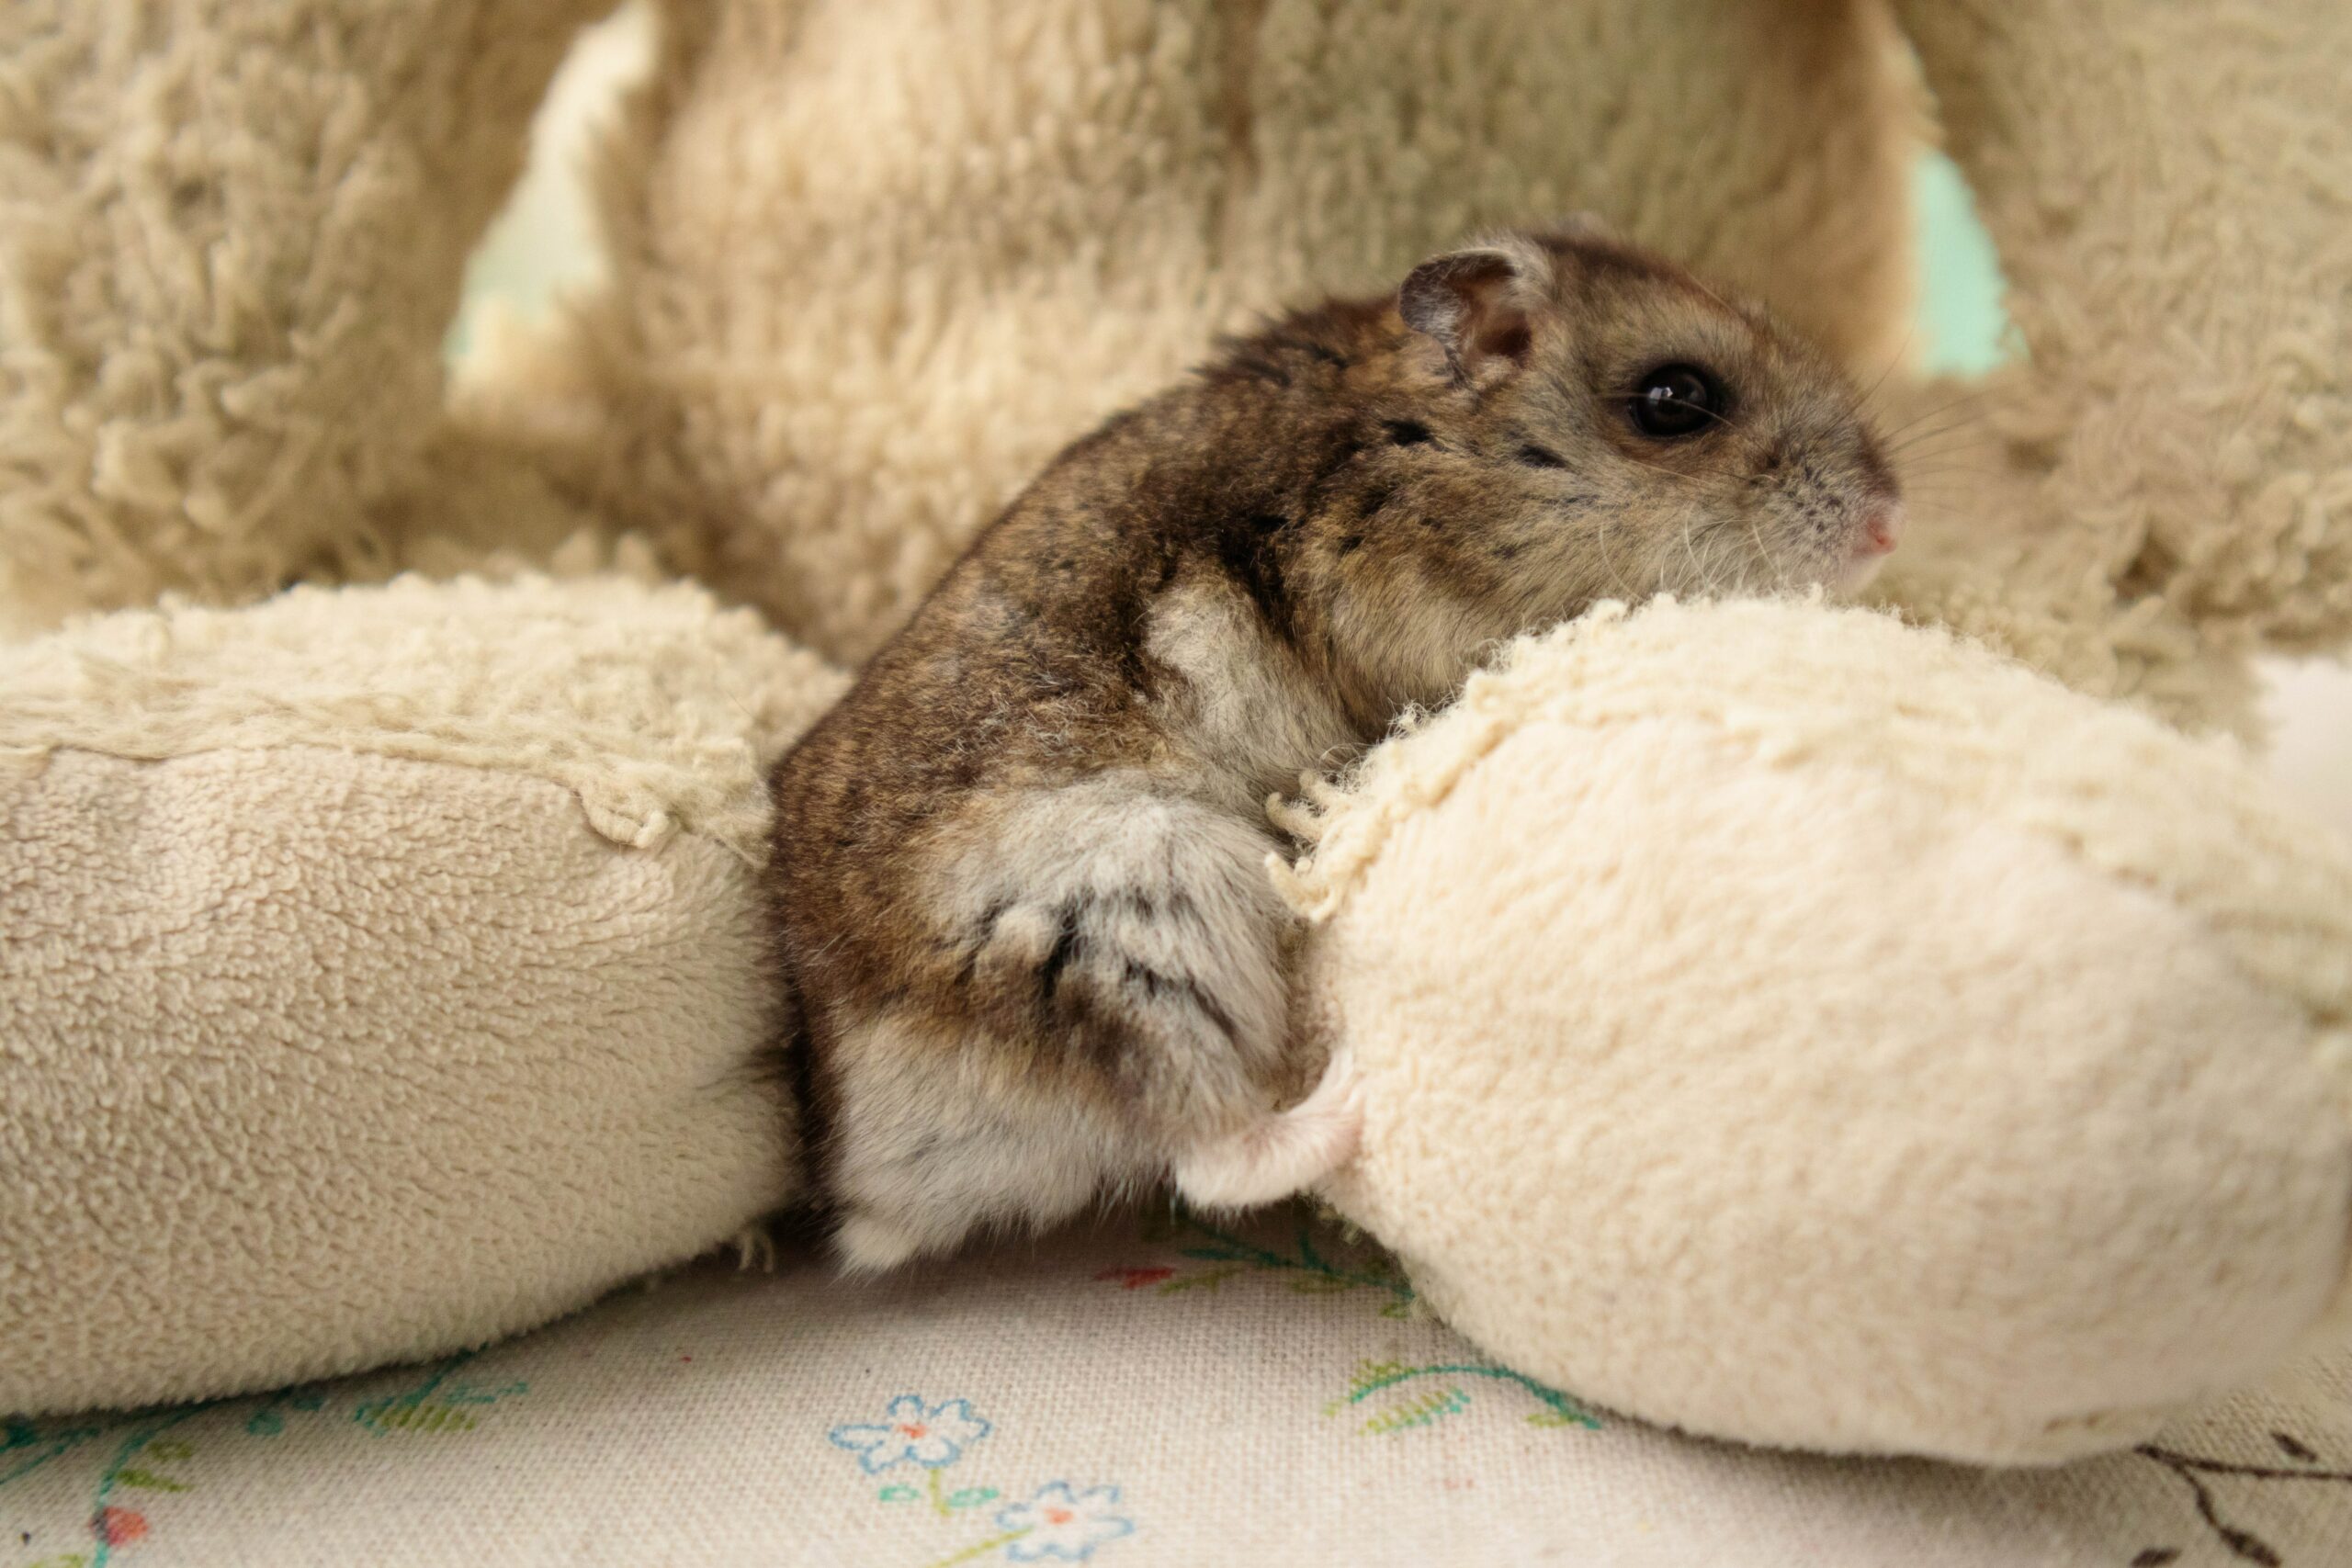 Hamster Heart Attacks: Can They Happen?